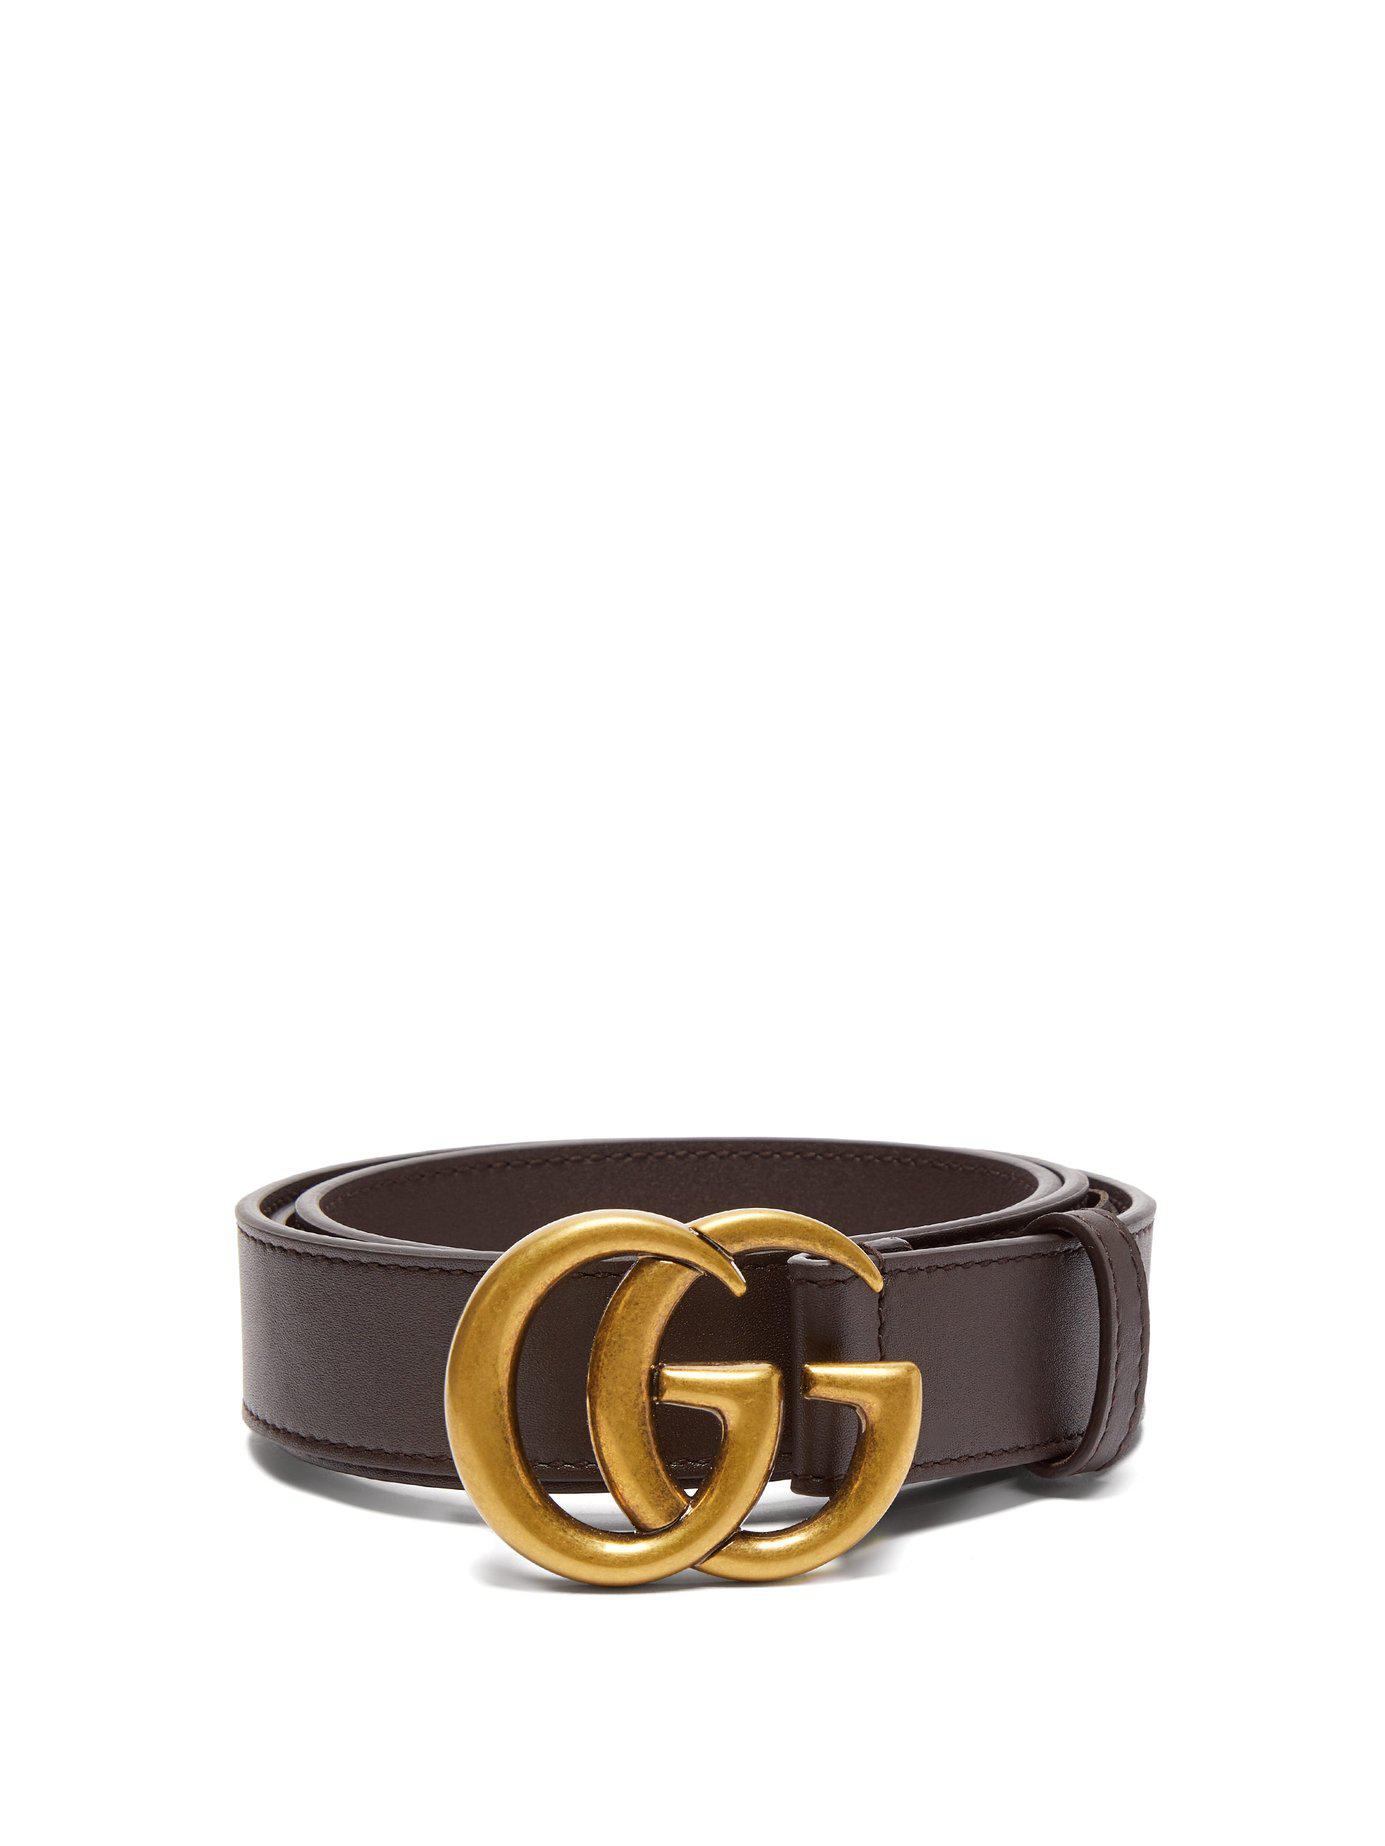 Gucci Gg Leather Belt in Brown for Men - Save 53% - Lyst